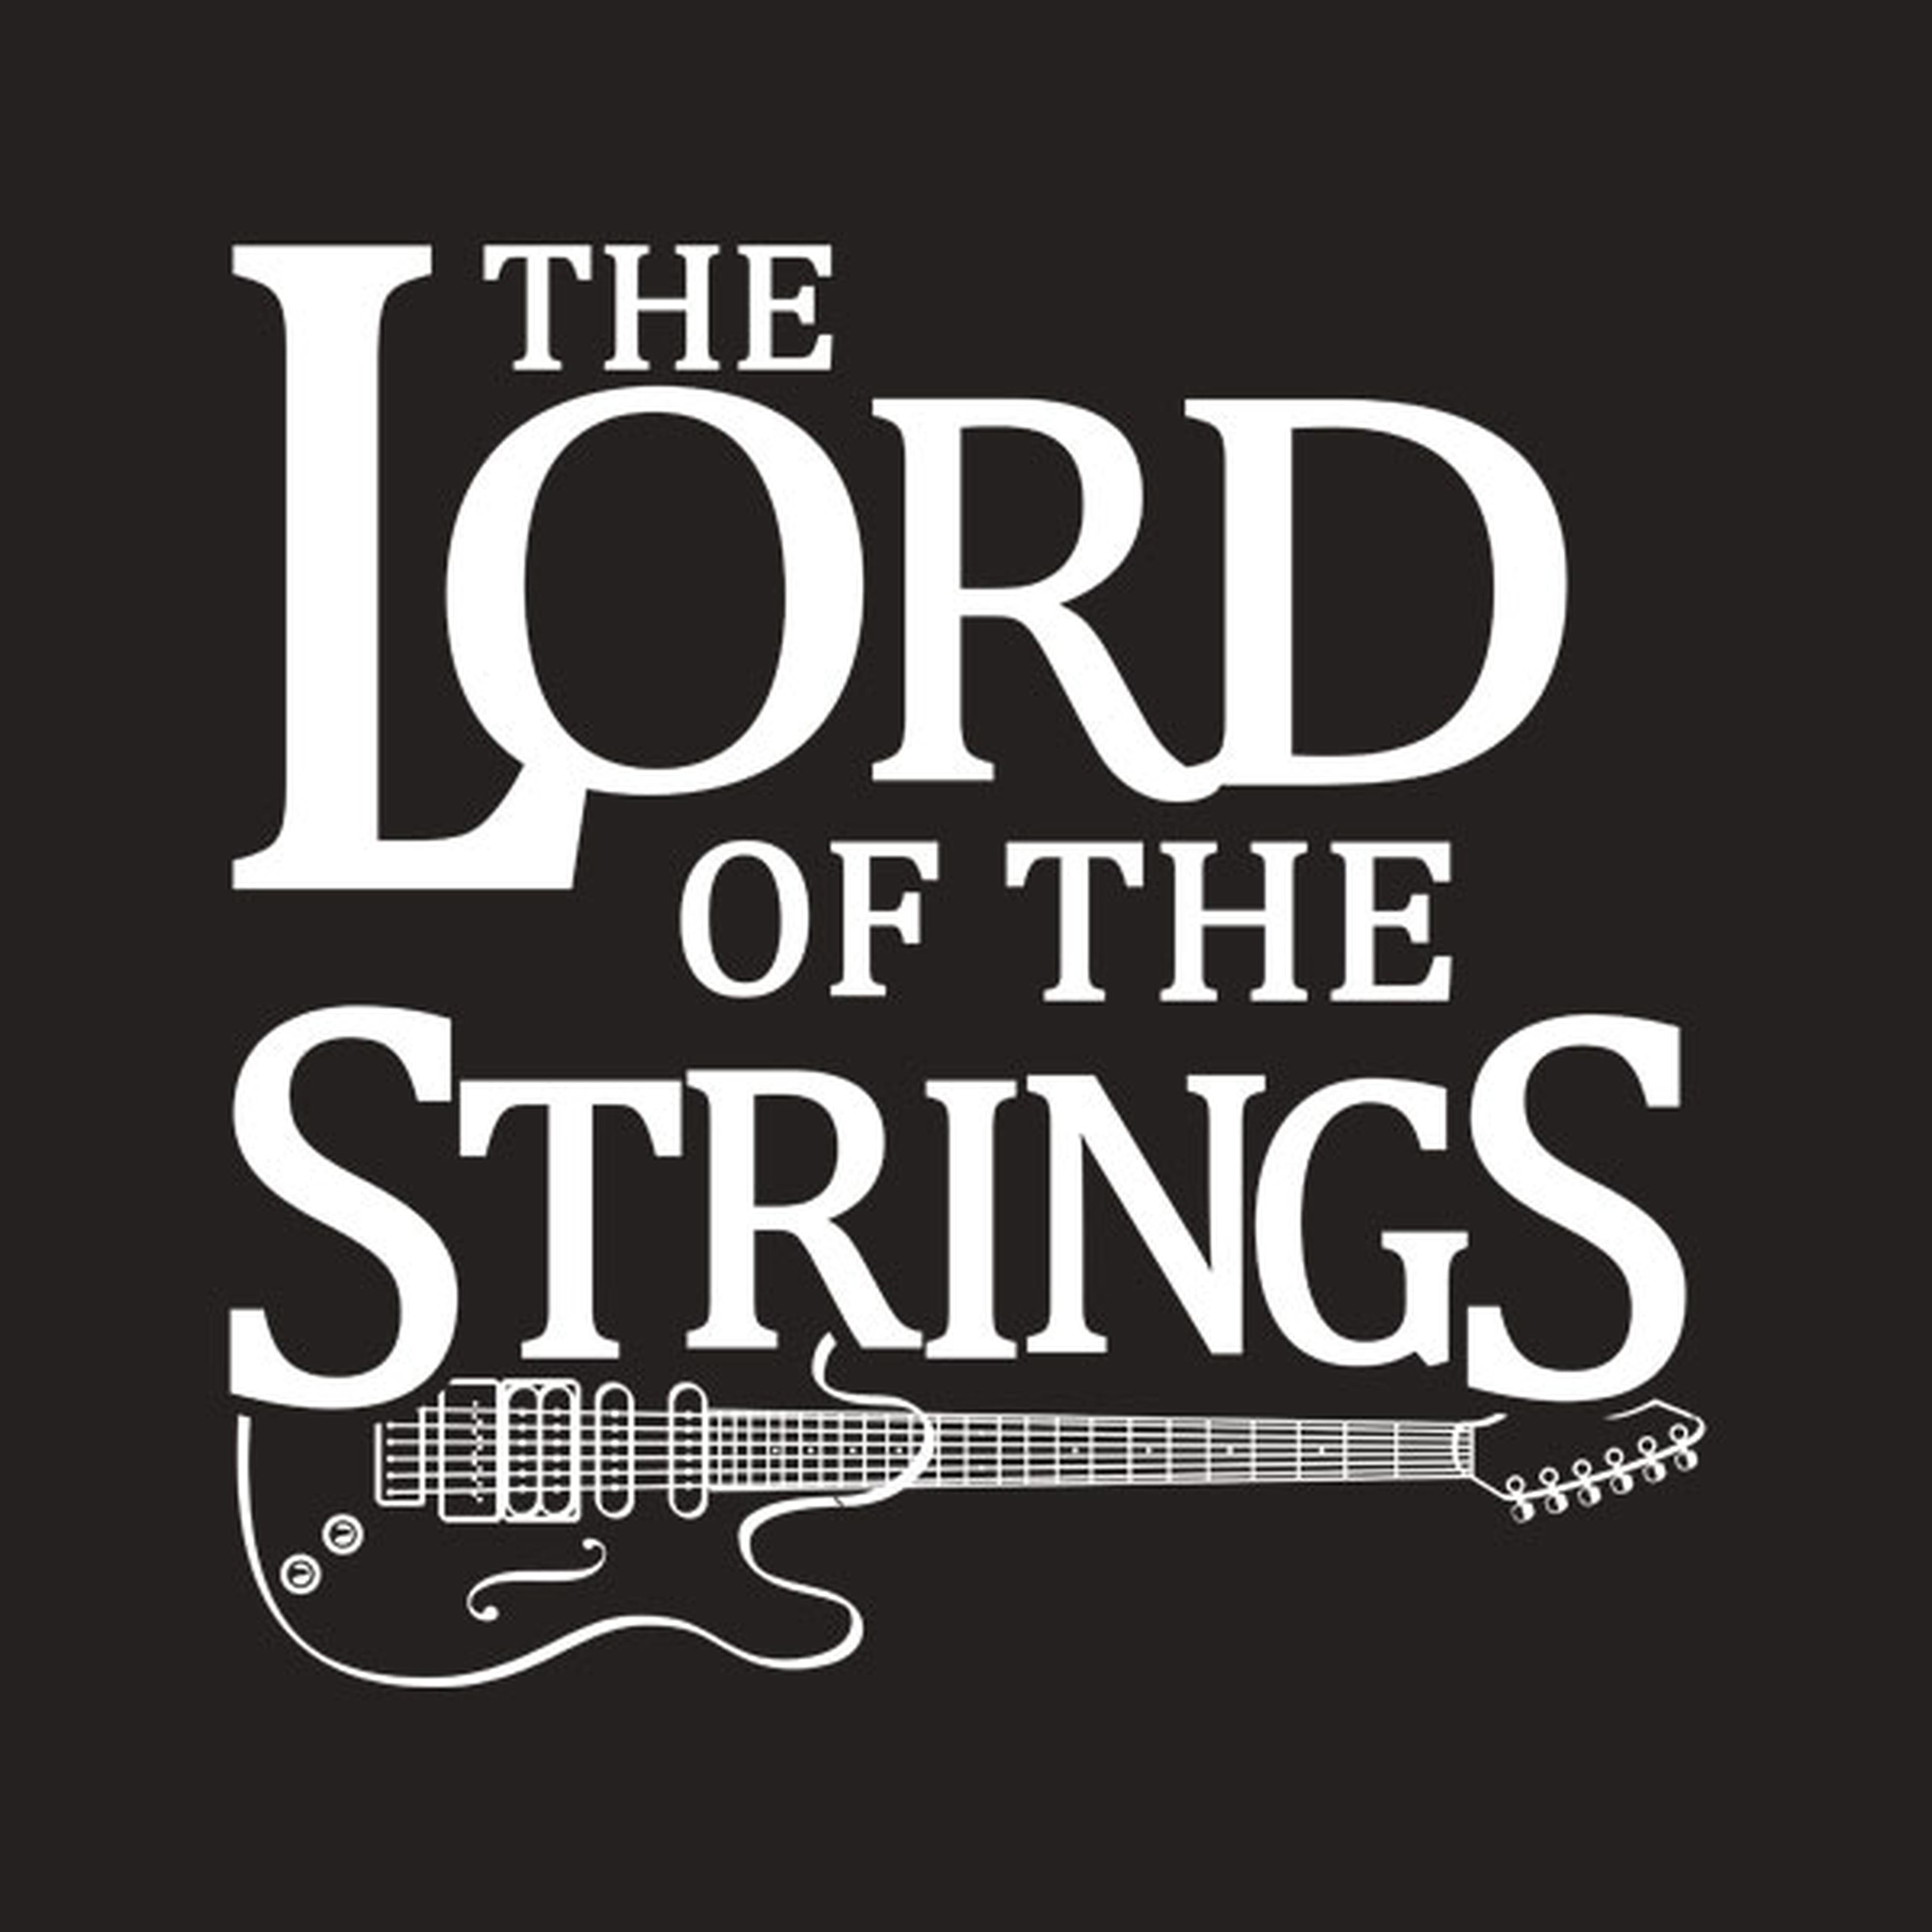 The Lord of Strings - T-shirt